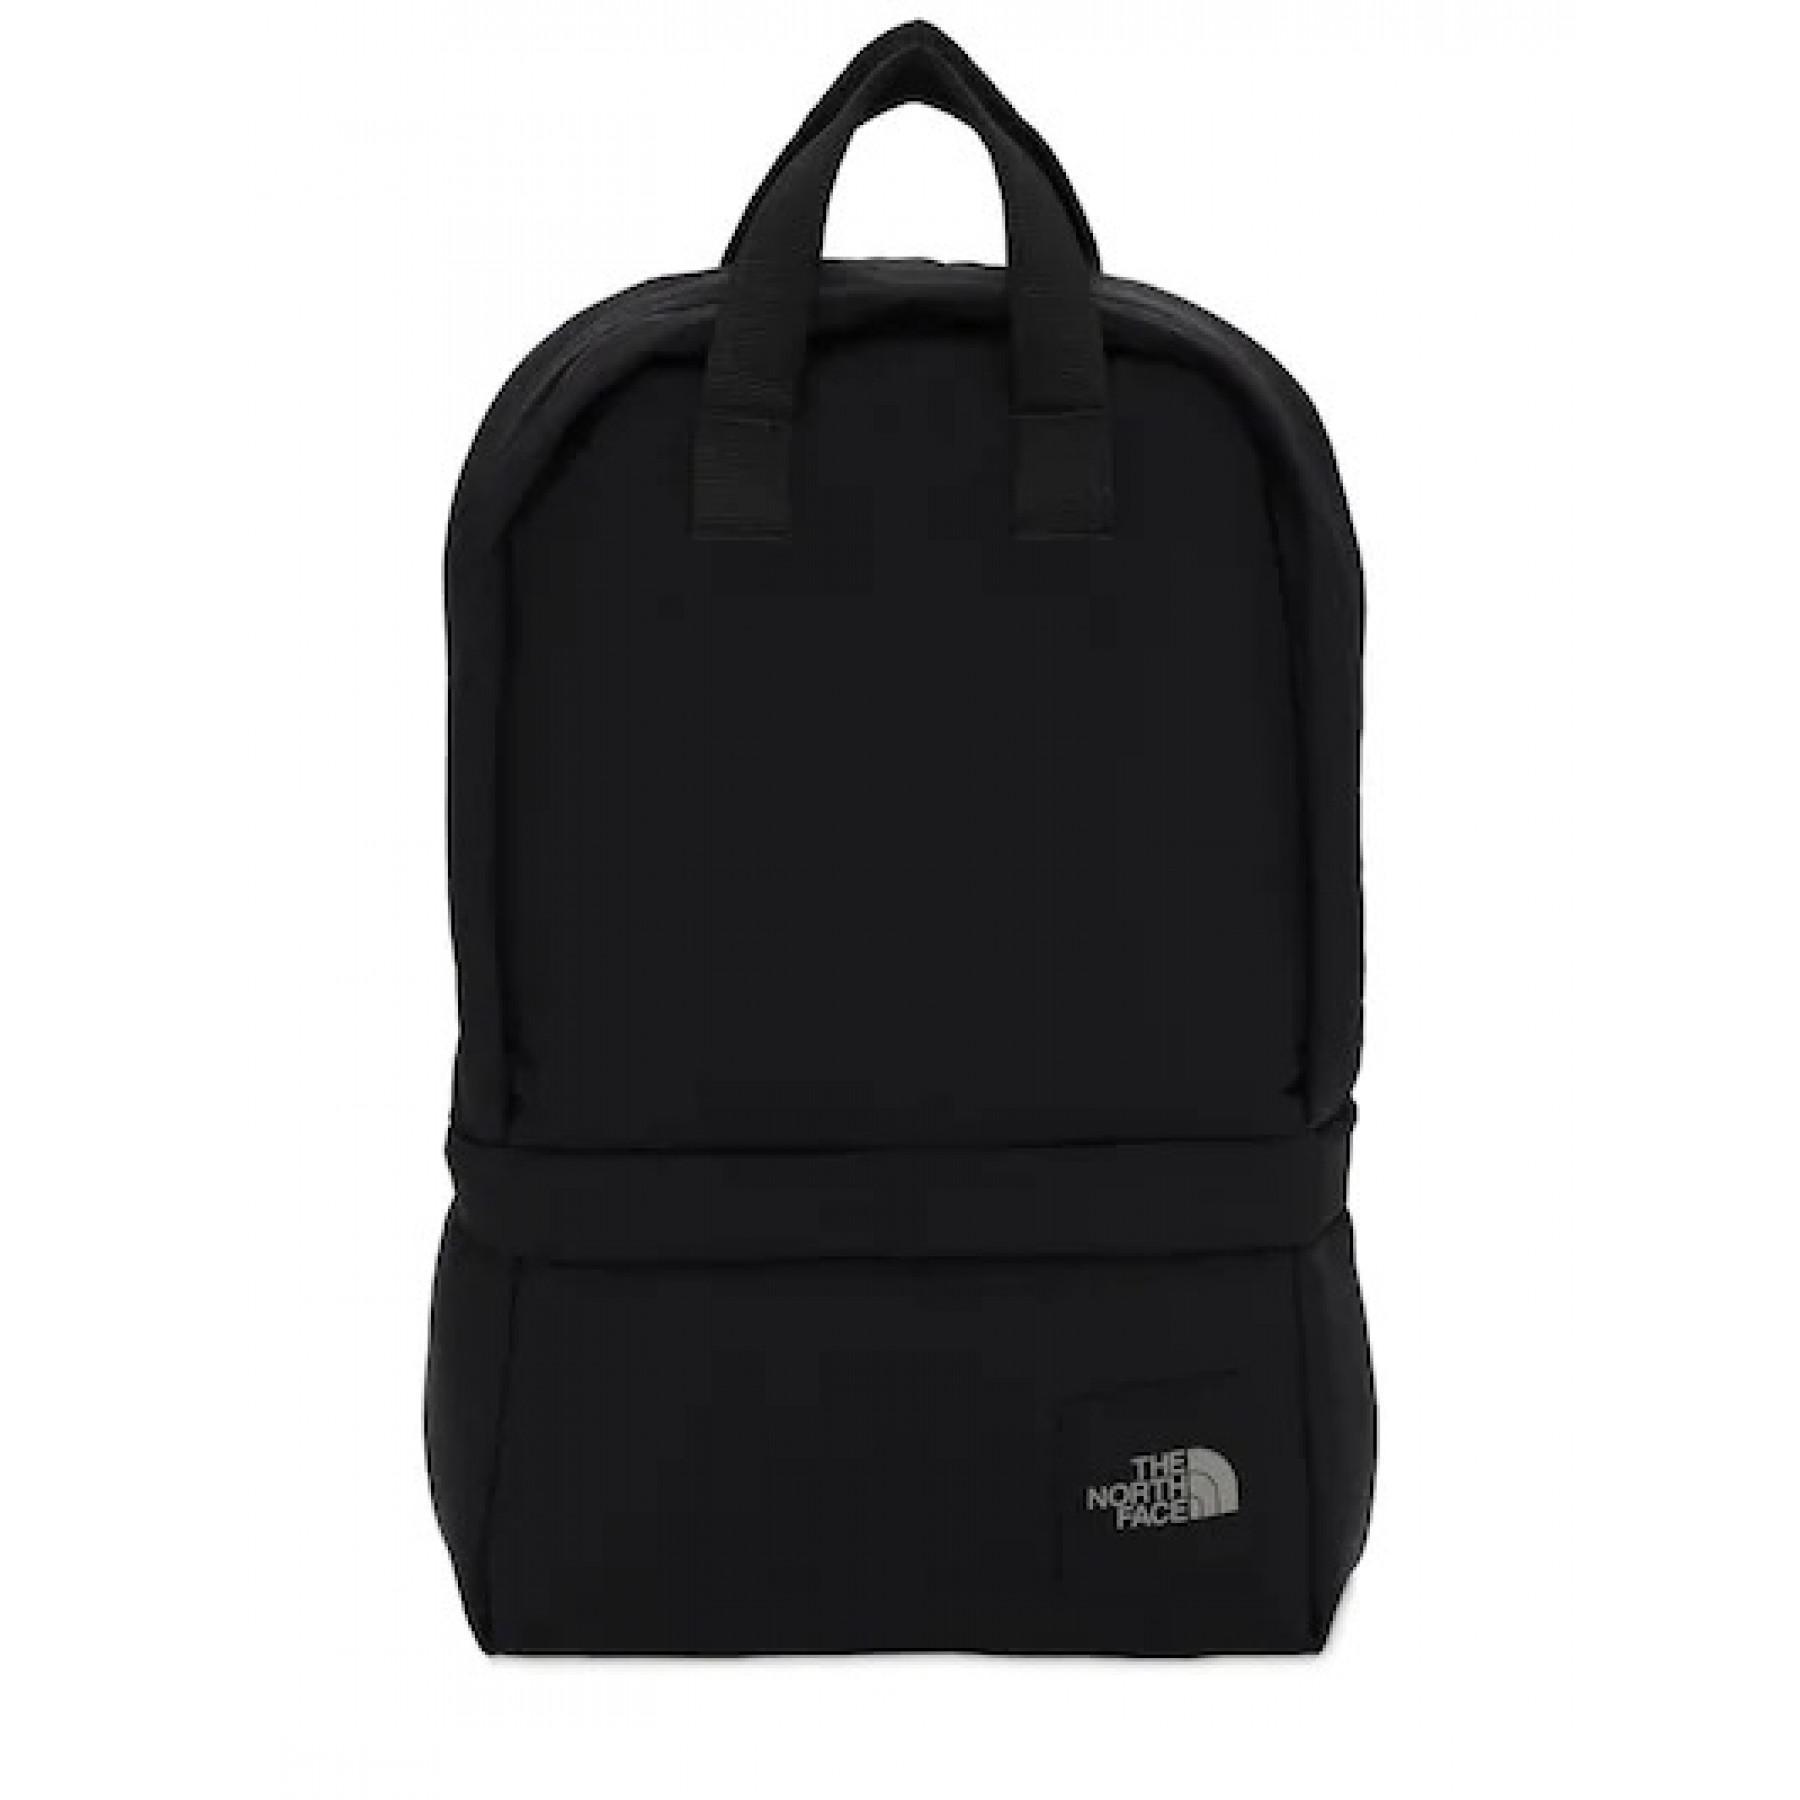 Bolsa The North Face City Voyager Daypack